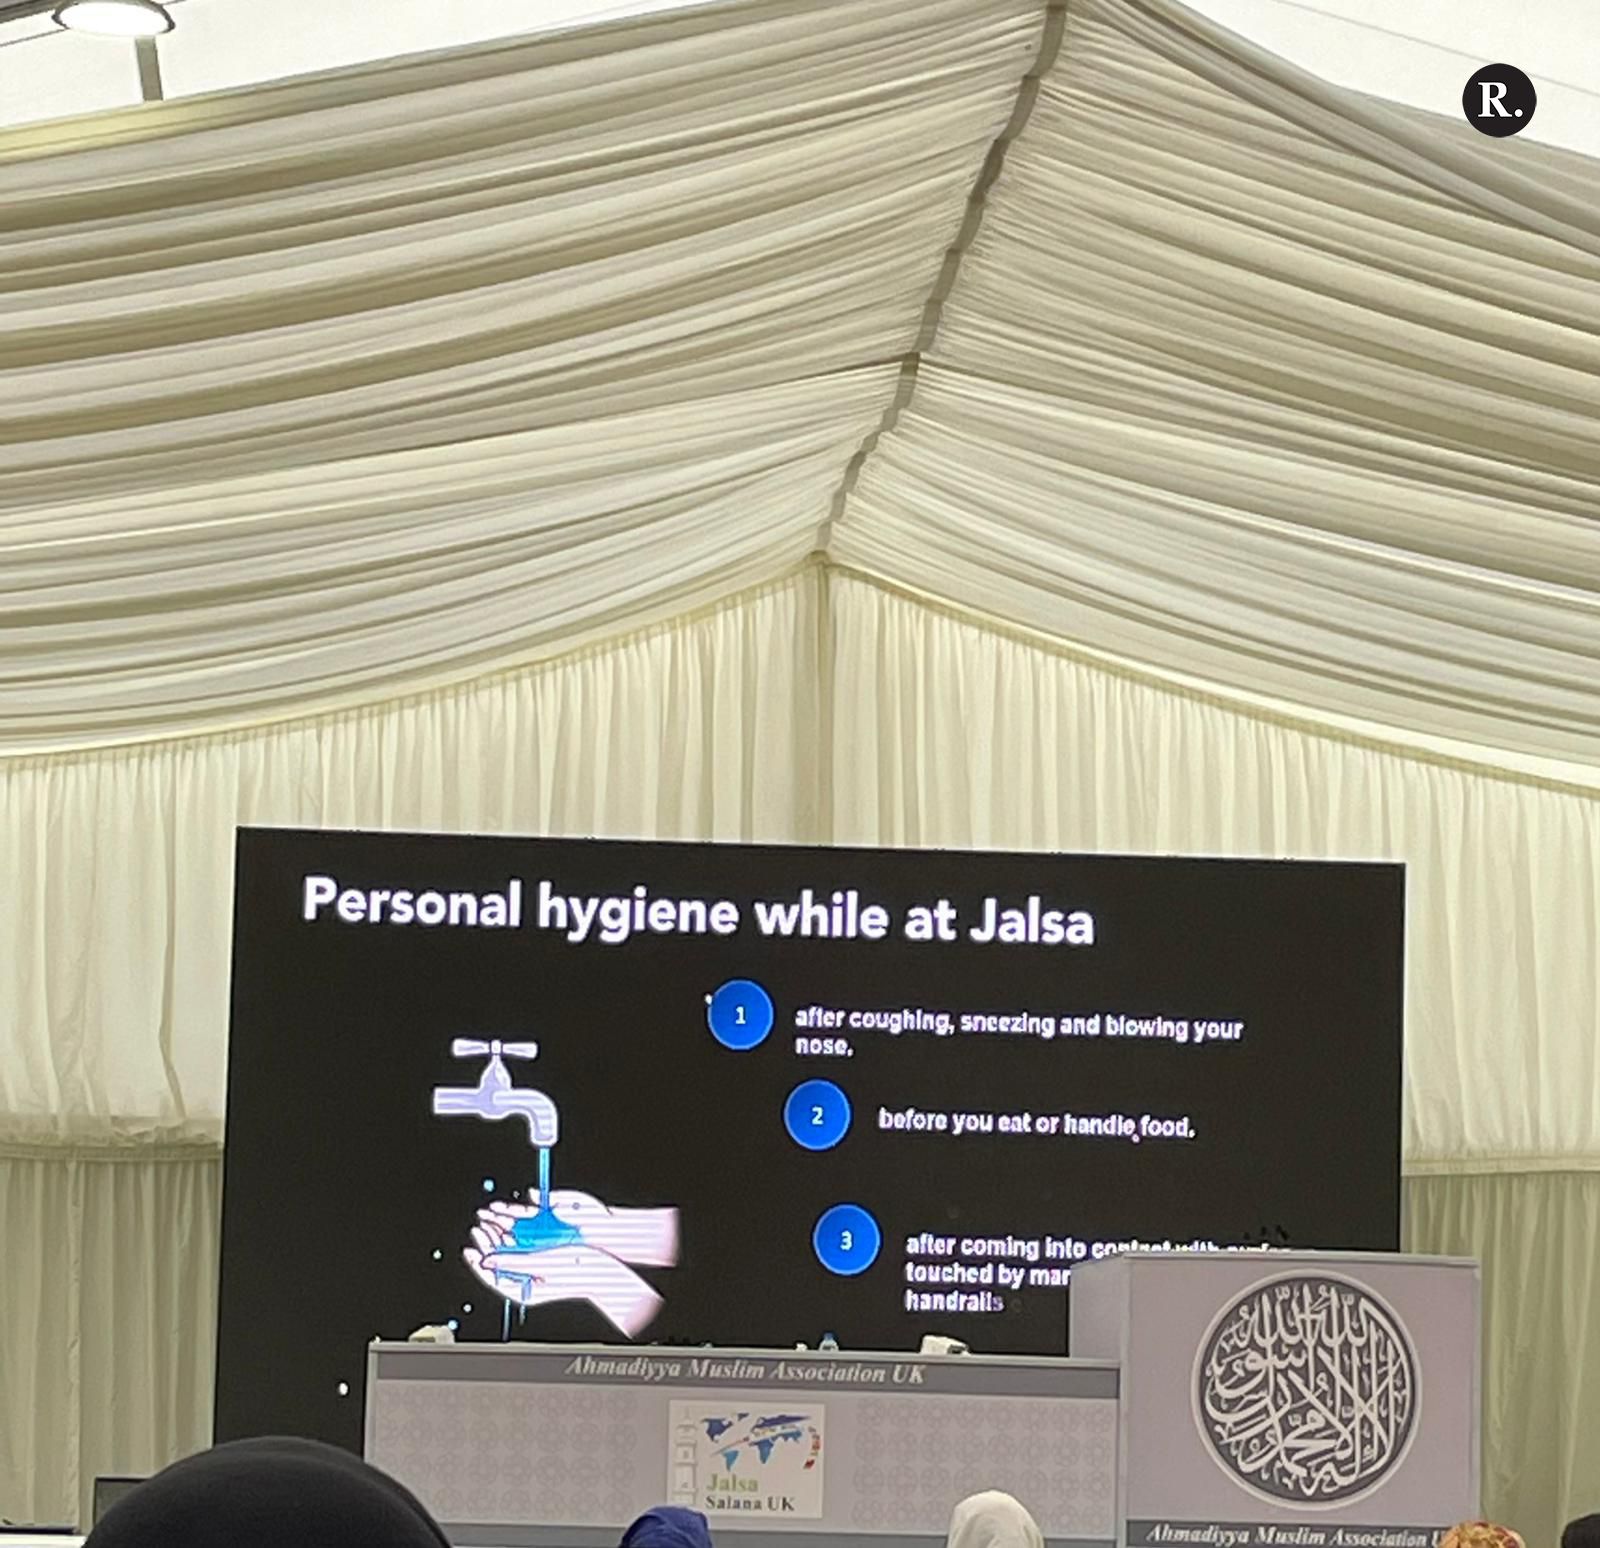 Jalsa Journal: Reporting from Day 2 of Jalsa Salana UK 2021